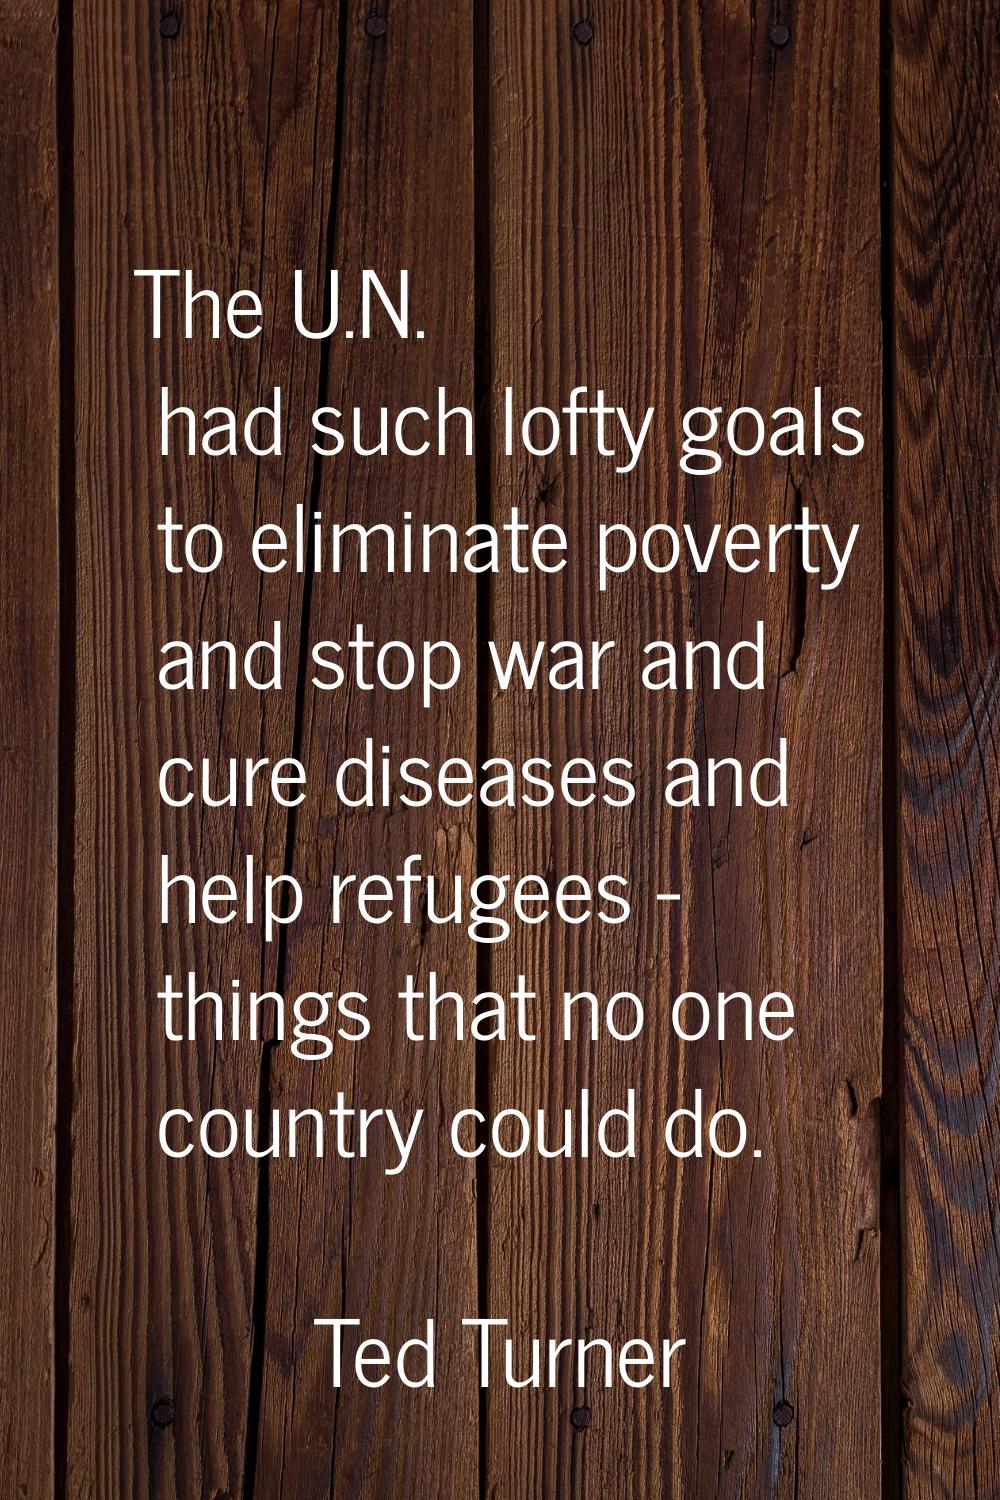 The U.N. had such lofty goals to eliminate poverty and stop war and cure diseases and help refugees